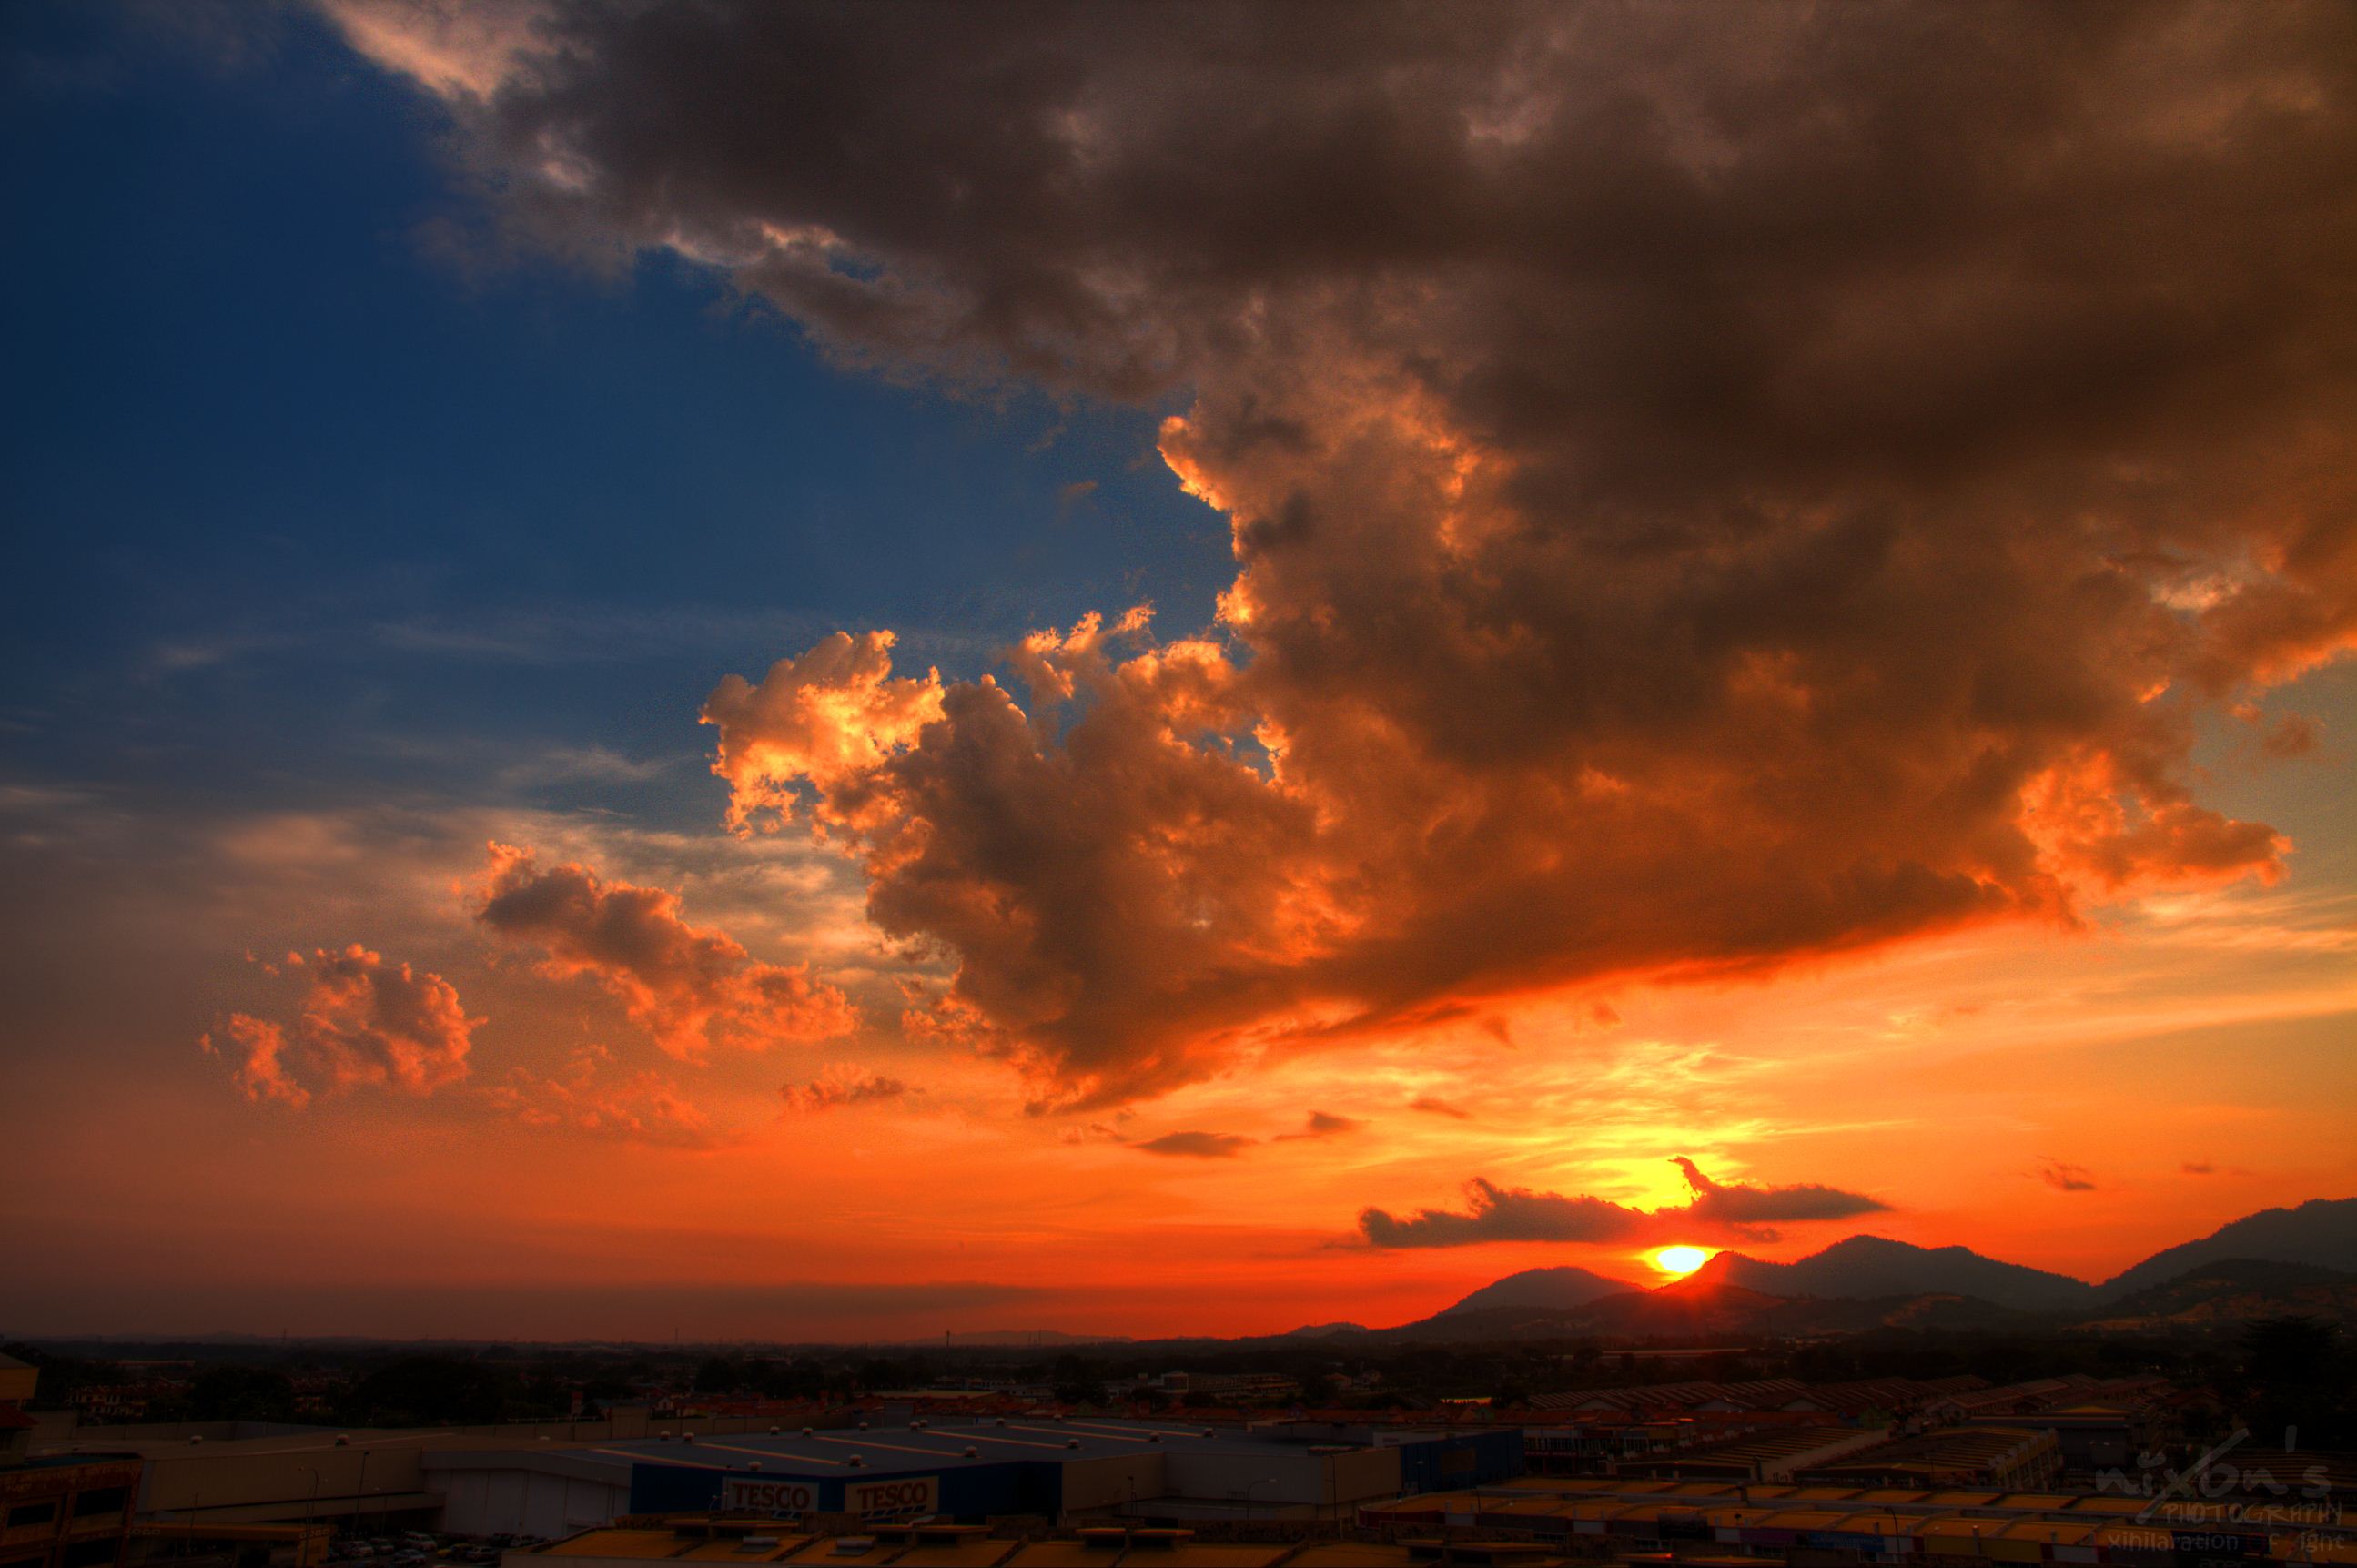 sunset_view_of_aeon_station_18_rooftop__